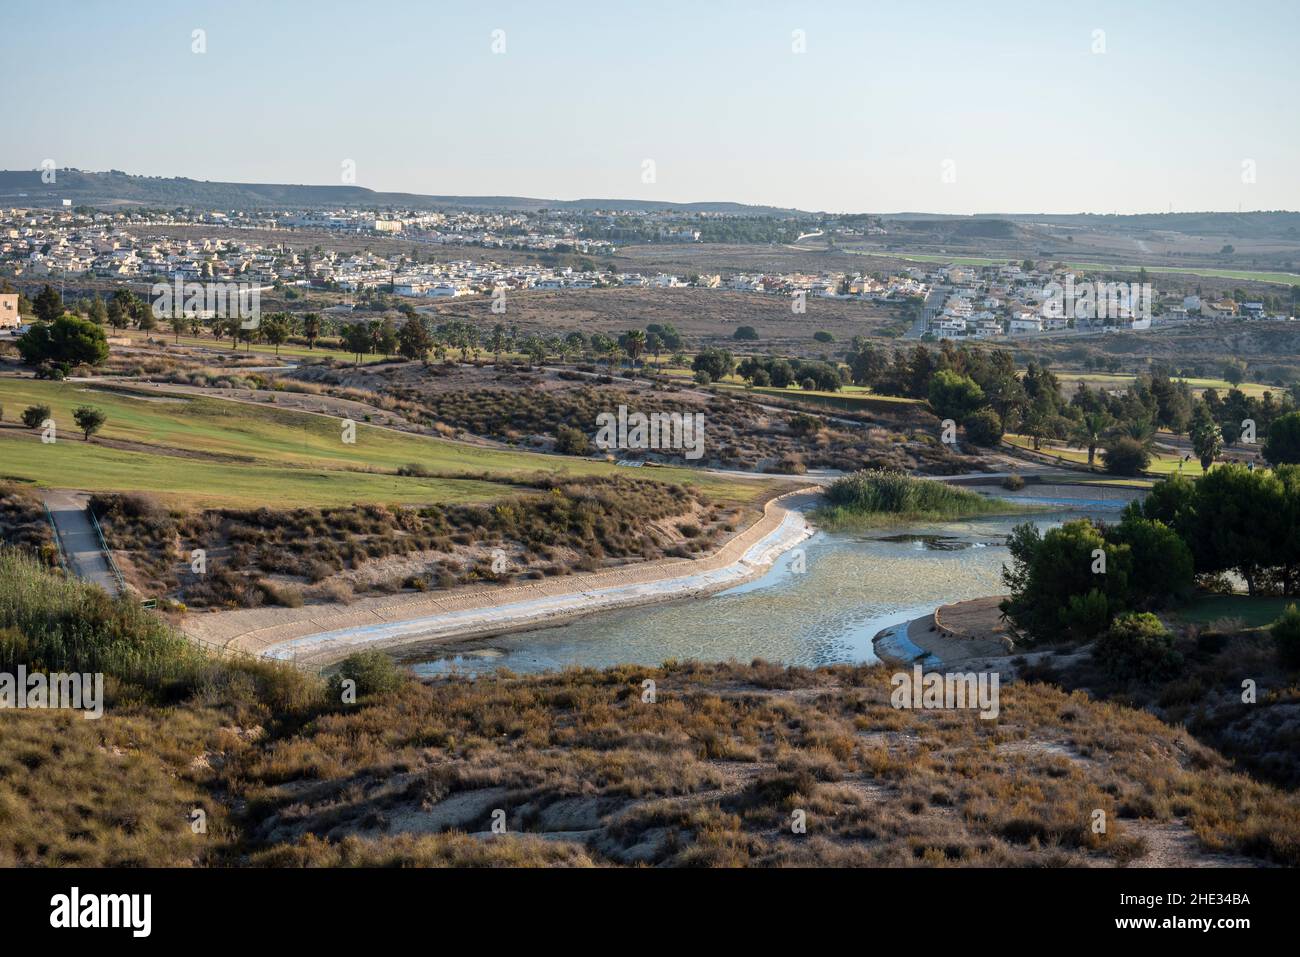 Camposol Golf High Resolution Stock Photography and Images - Alamy